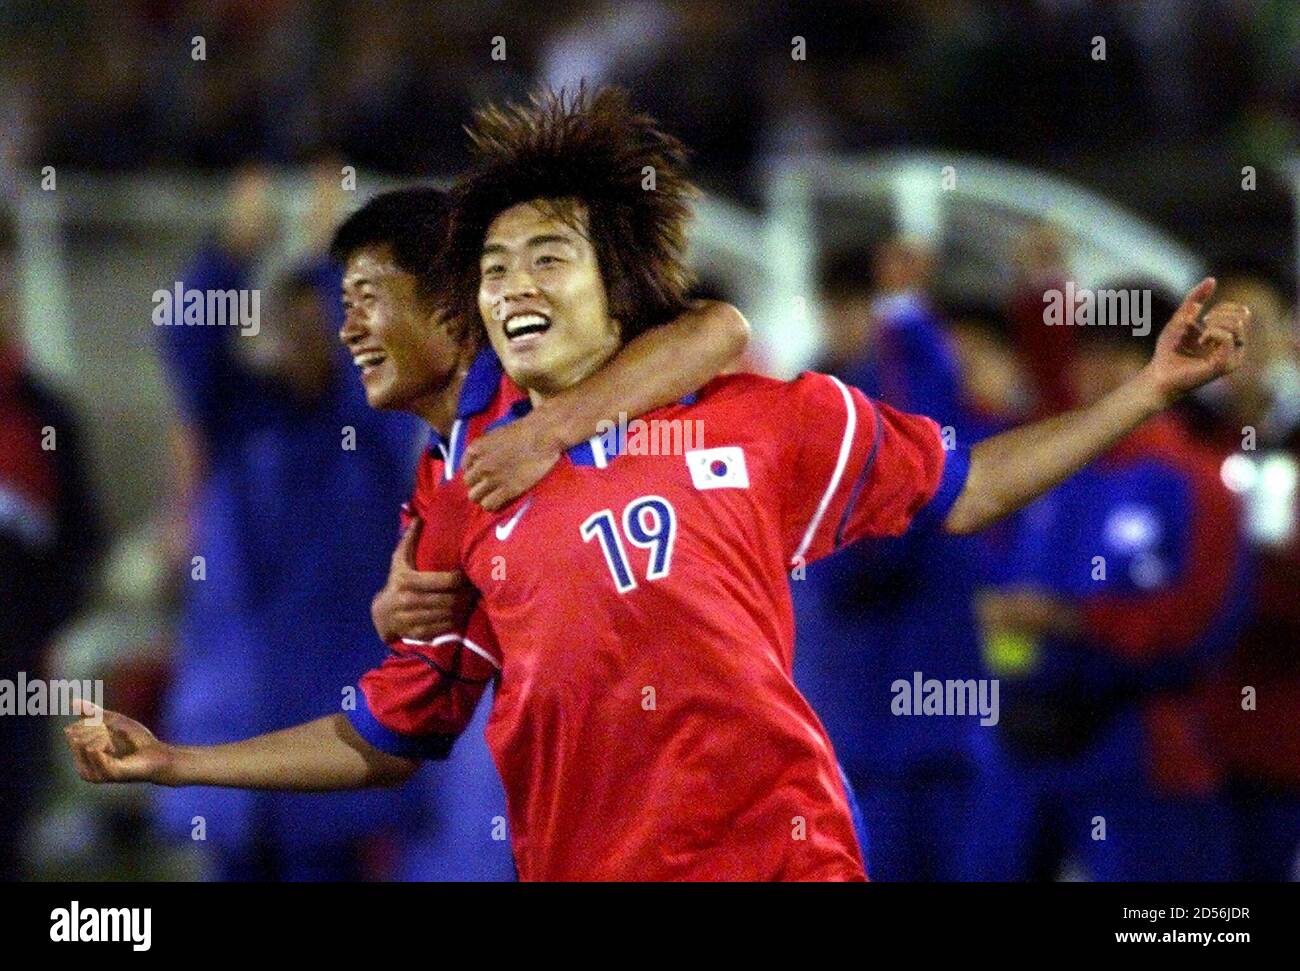 South Korea's Lee Dong-Gook celebrates his goal against Costa Rica with  teammate Lee Young-Pyo (L) in the first half during first round action of  the CONCACAF Gold Cup in Los Angeles February